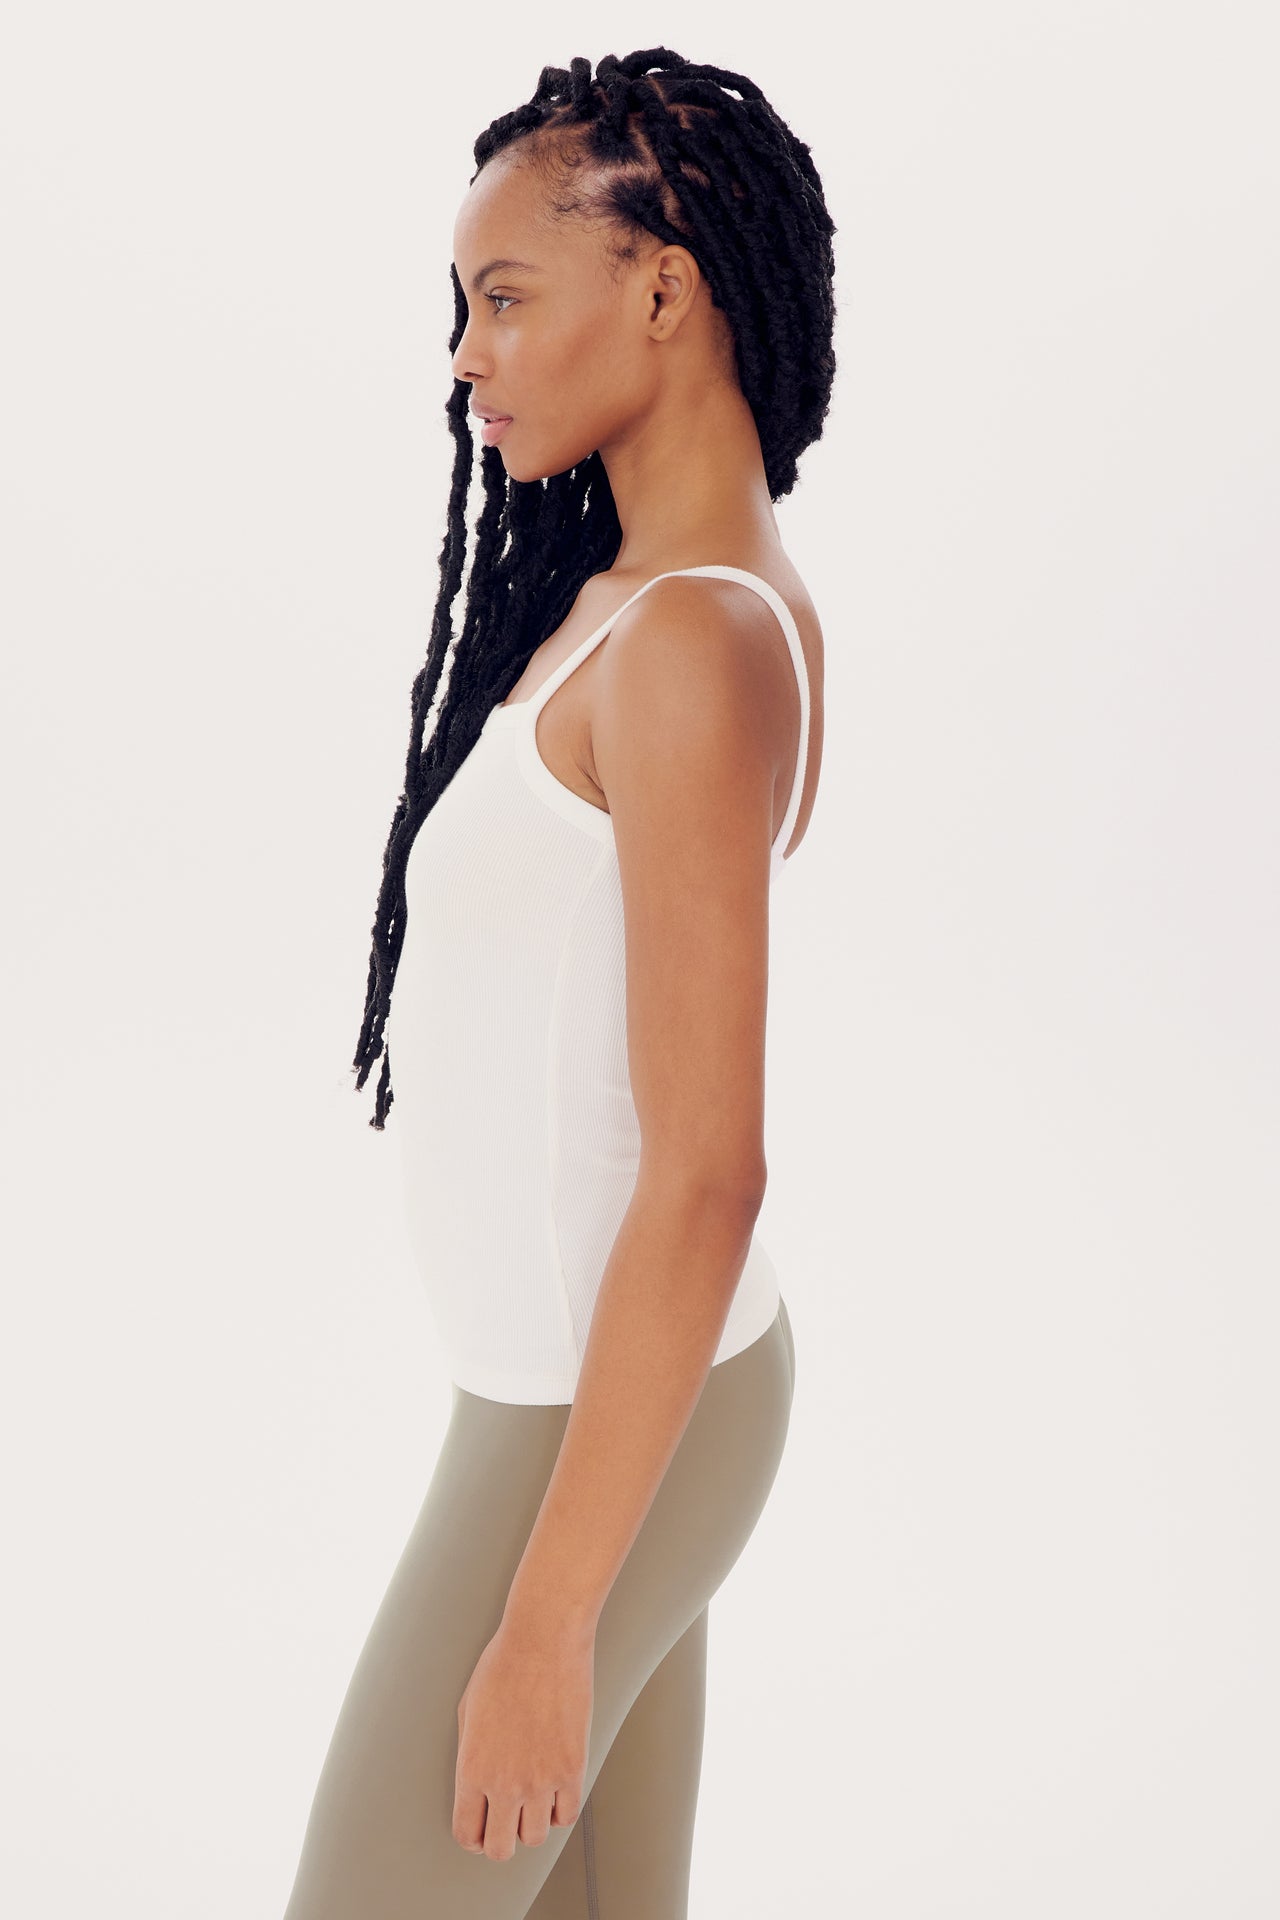 Profile view of a woman with braided hair, wearing an SPLITS59 Romy Rib Tank in White and green leggings, standing against a plain background.